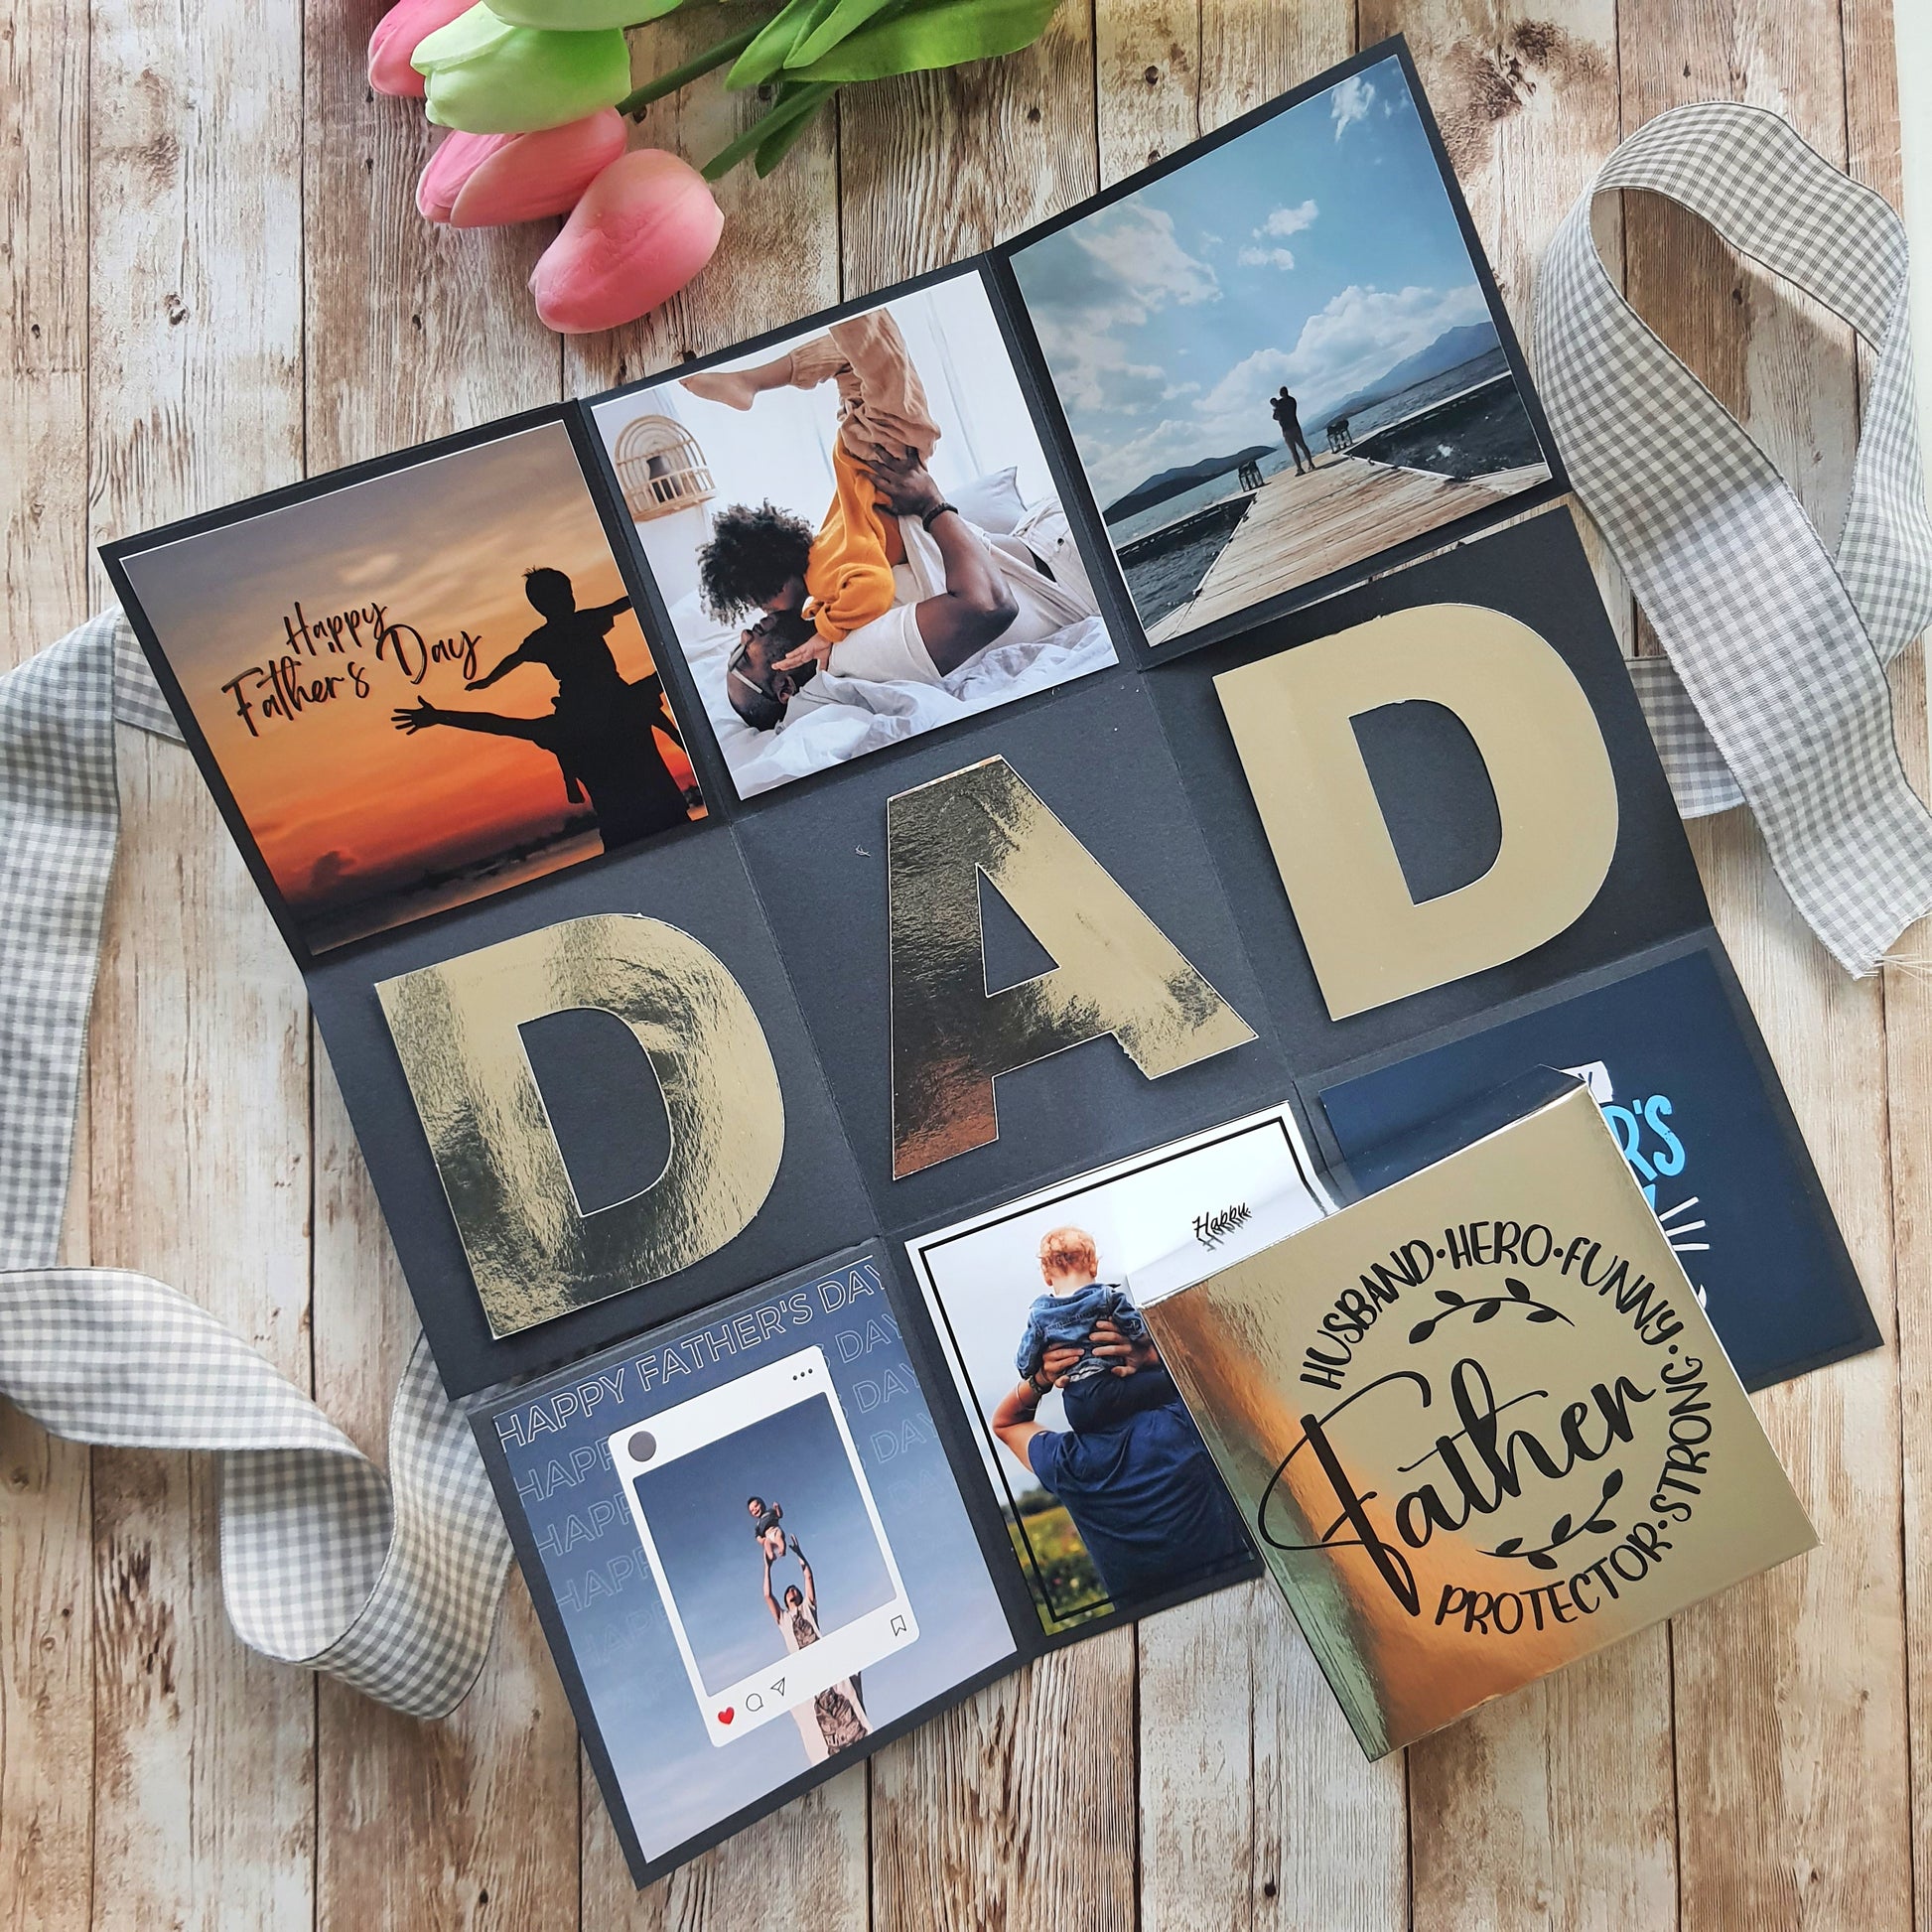 How to Make an Exploding Scrapbook for Father's Day